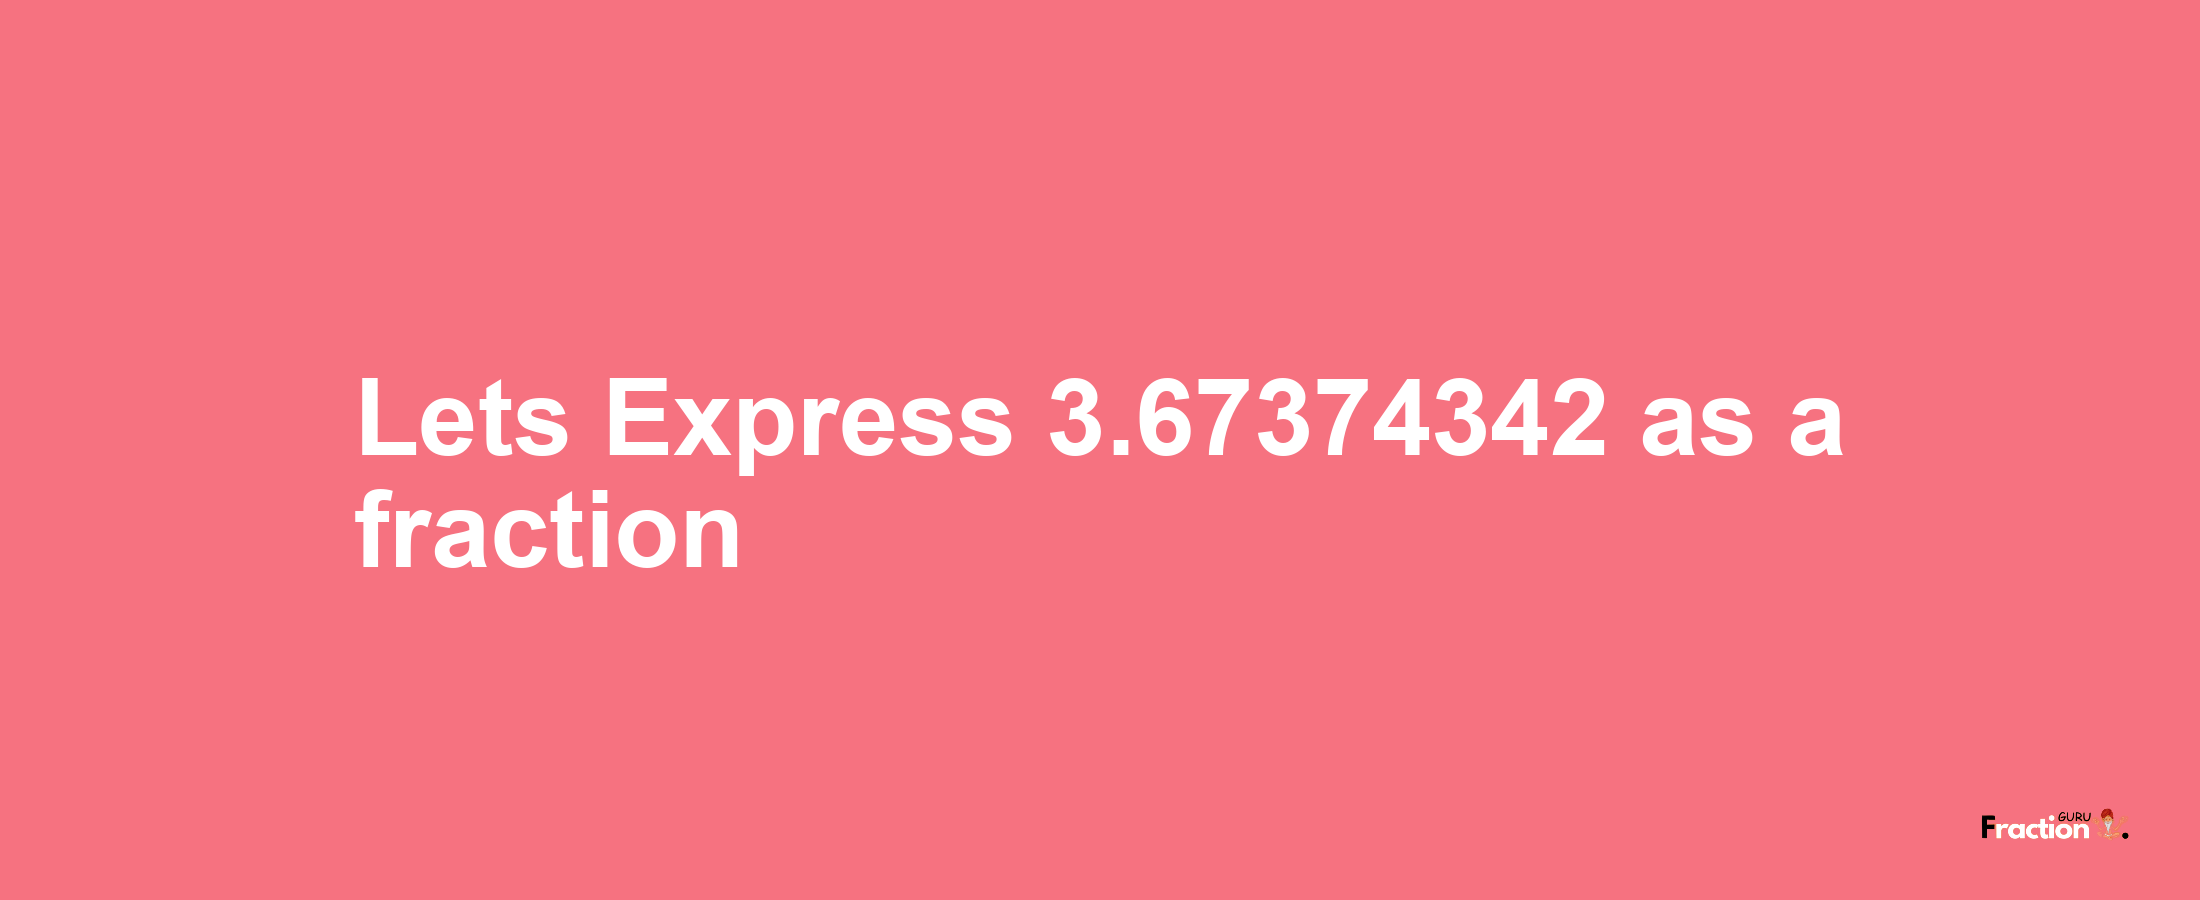 Lets Express 3.67374342 as afraction